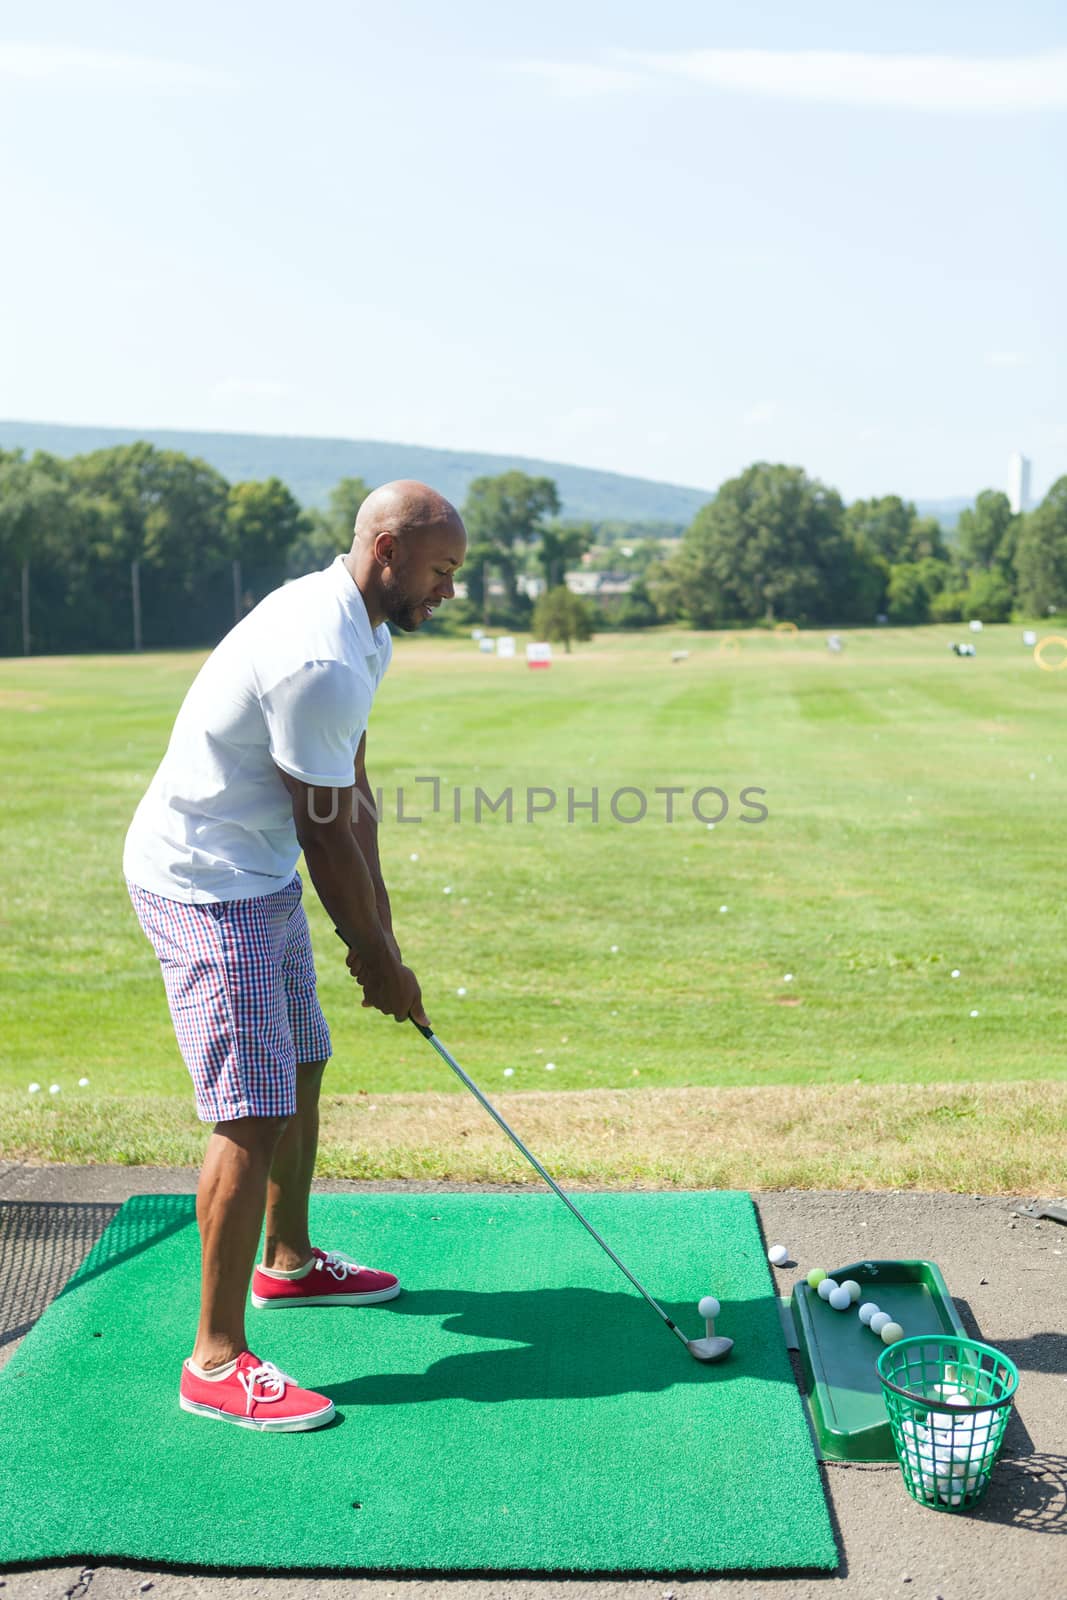 Driving Range Tee Off by graficallyminded